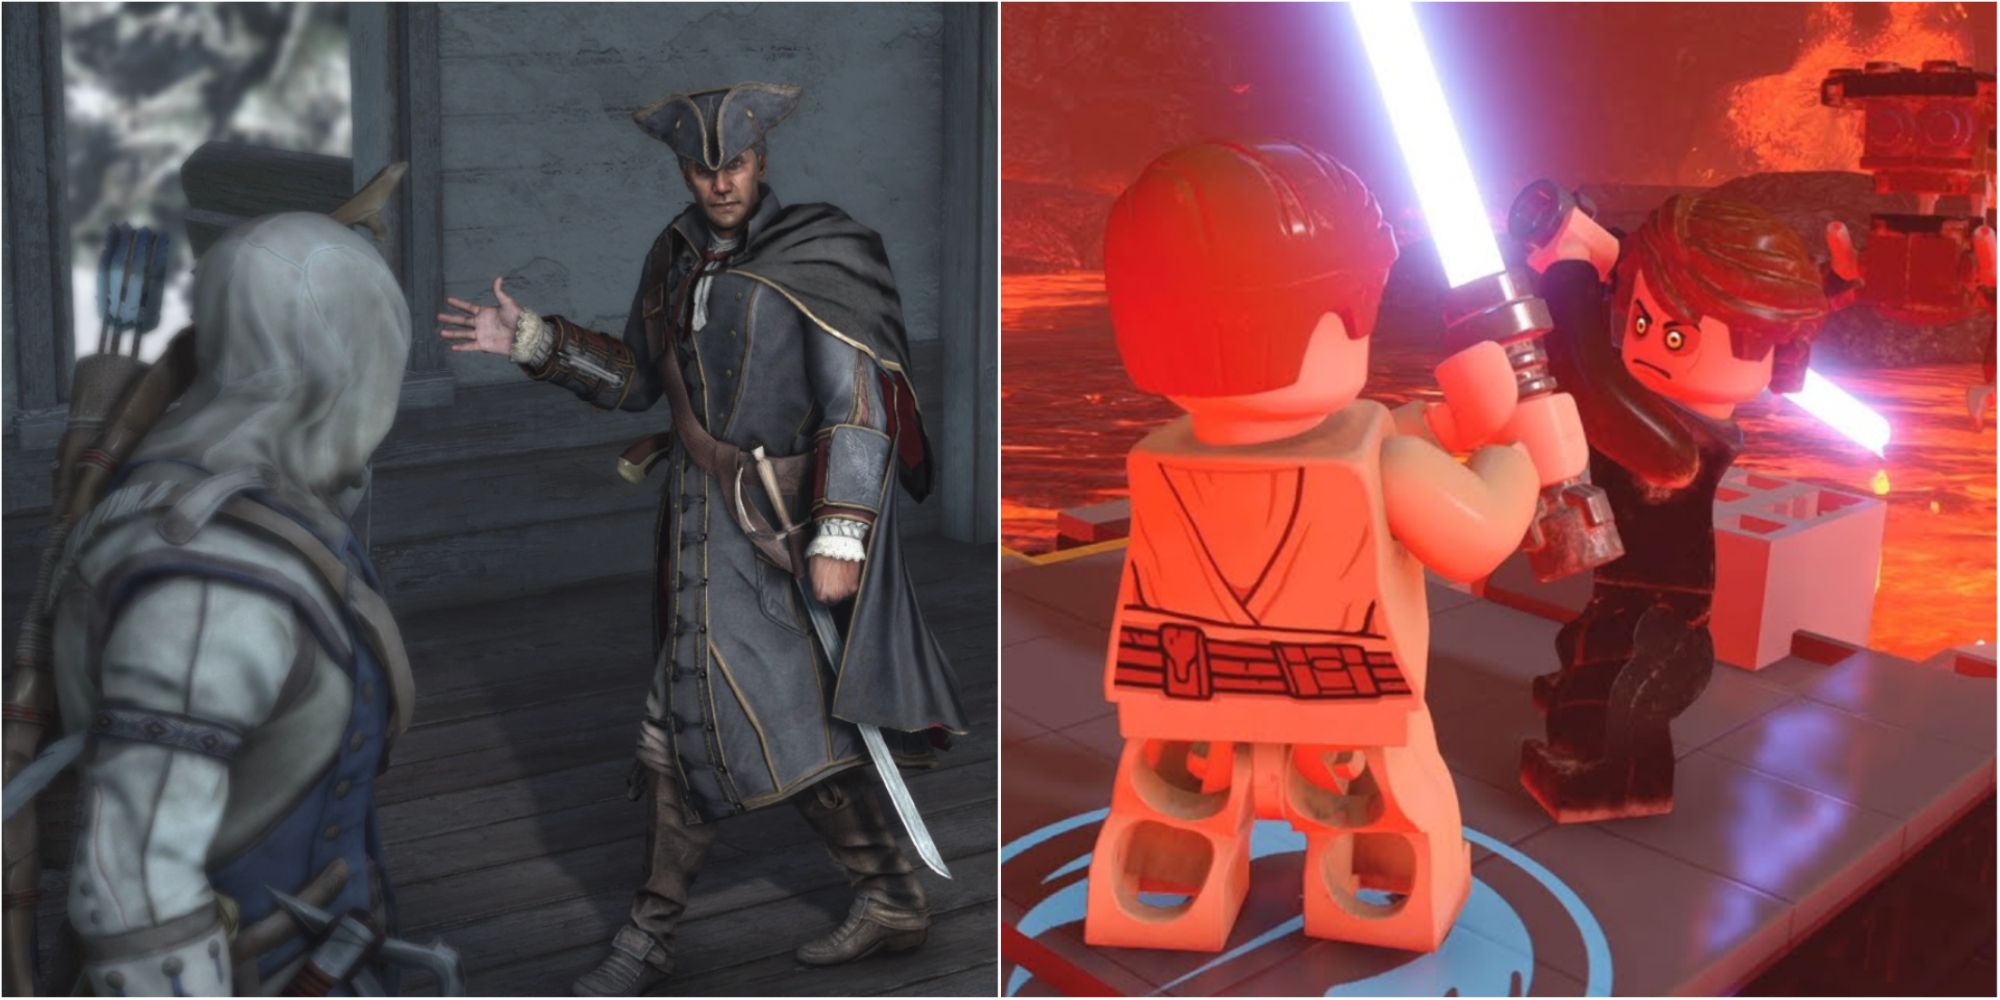 Playable Characters Who Fight Featured Split Image Assassin's Creed 3 and LEGO Star Wars